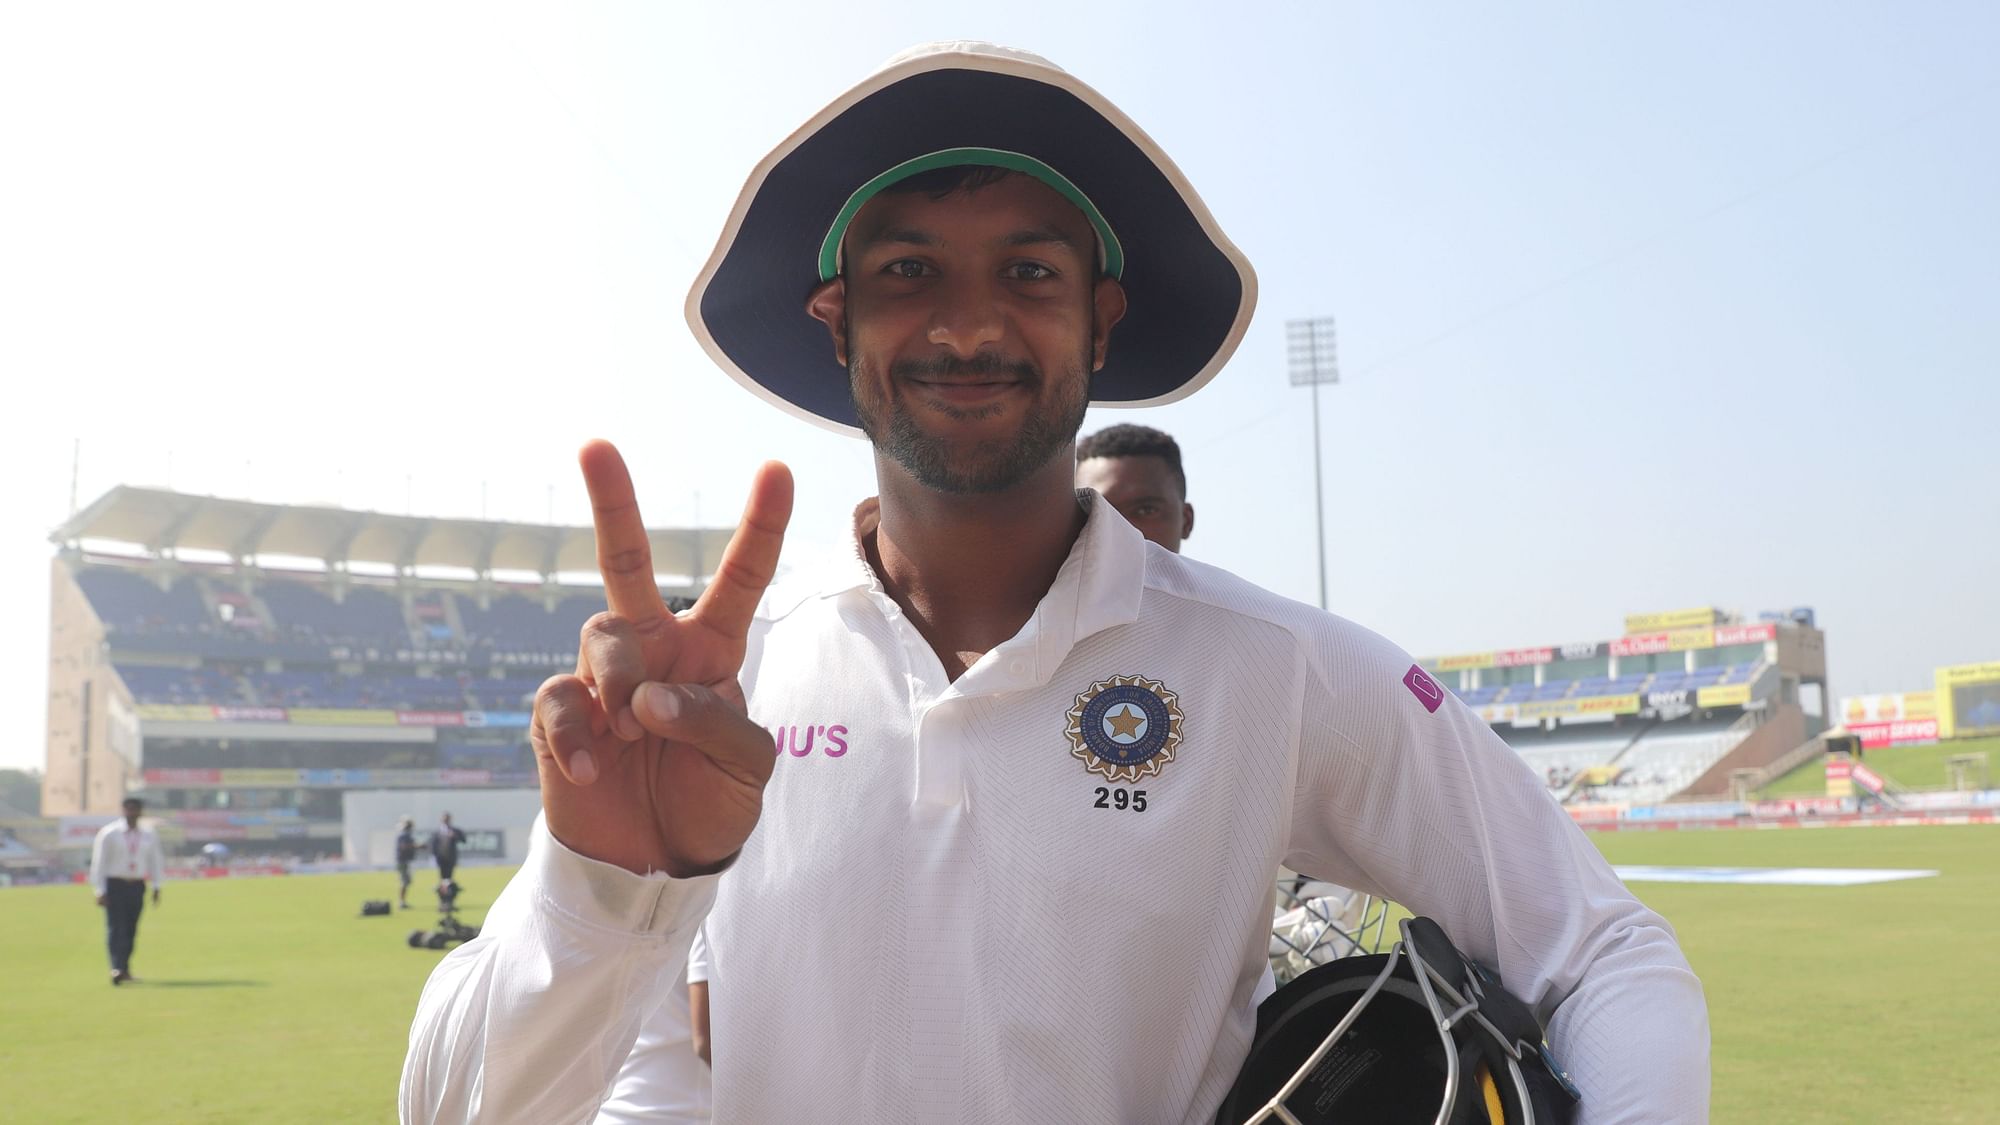 Mayank Agarwal retired on 81 off 99 balls in India’s Tour Game before the Test series.